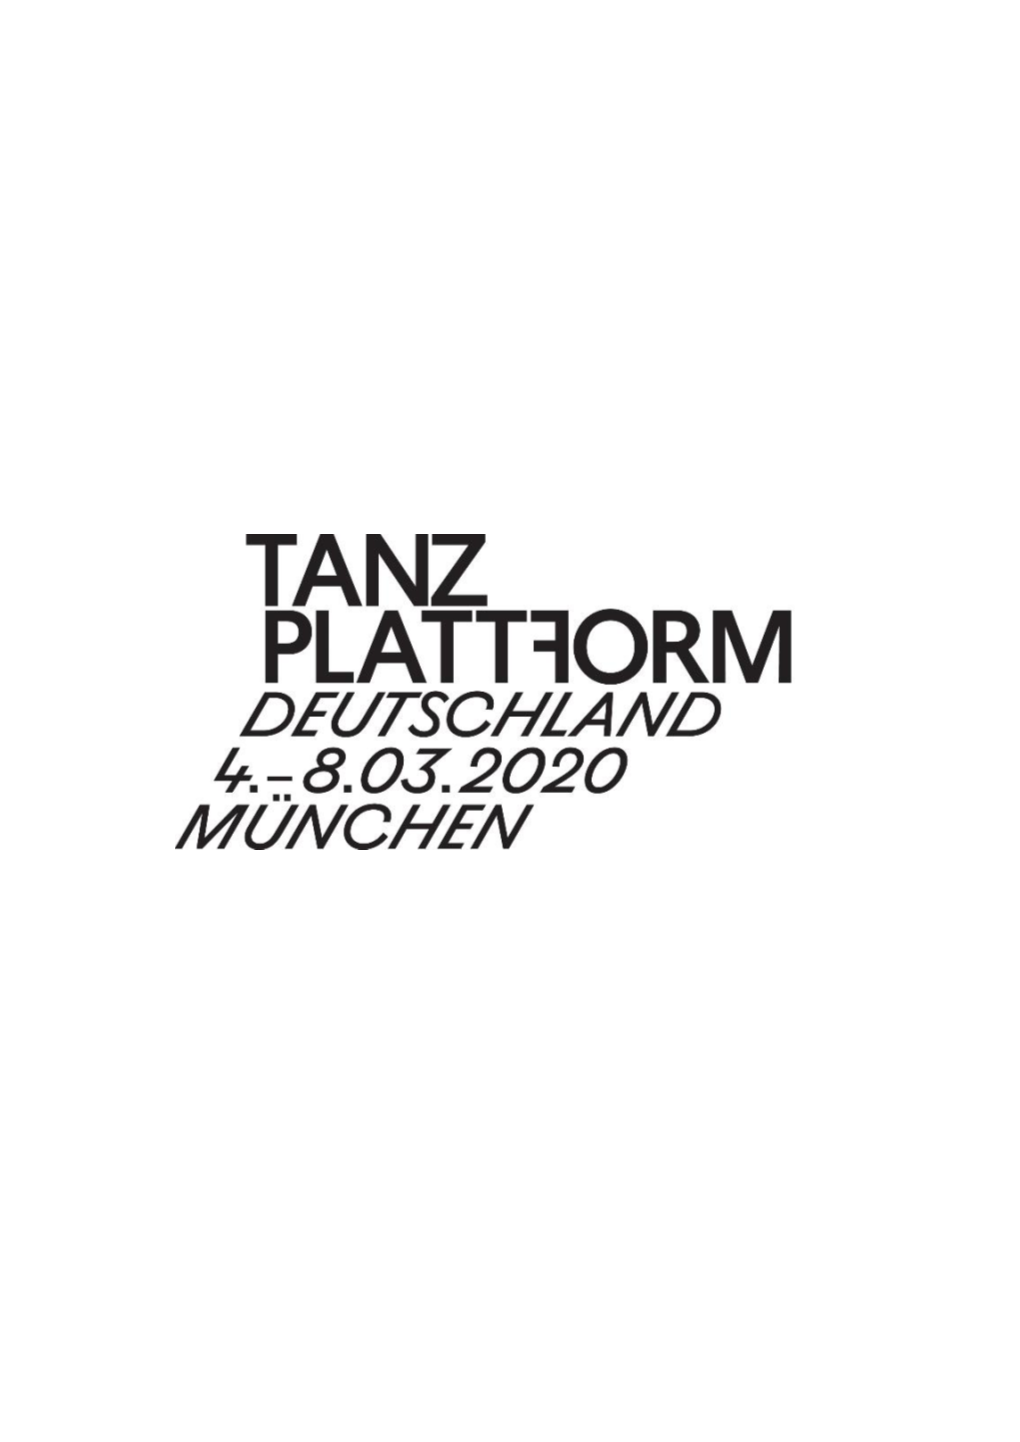 The GERMAN DANCE PLATFORM Sees Itself As a Forum to Present Recent Developments and Innovative Currents in German Contemporary Dance